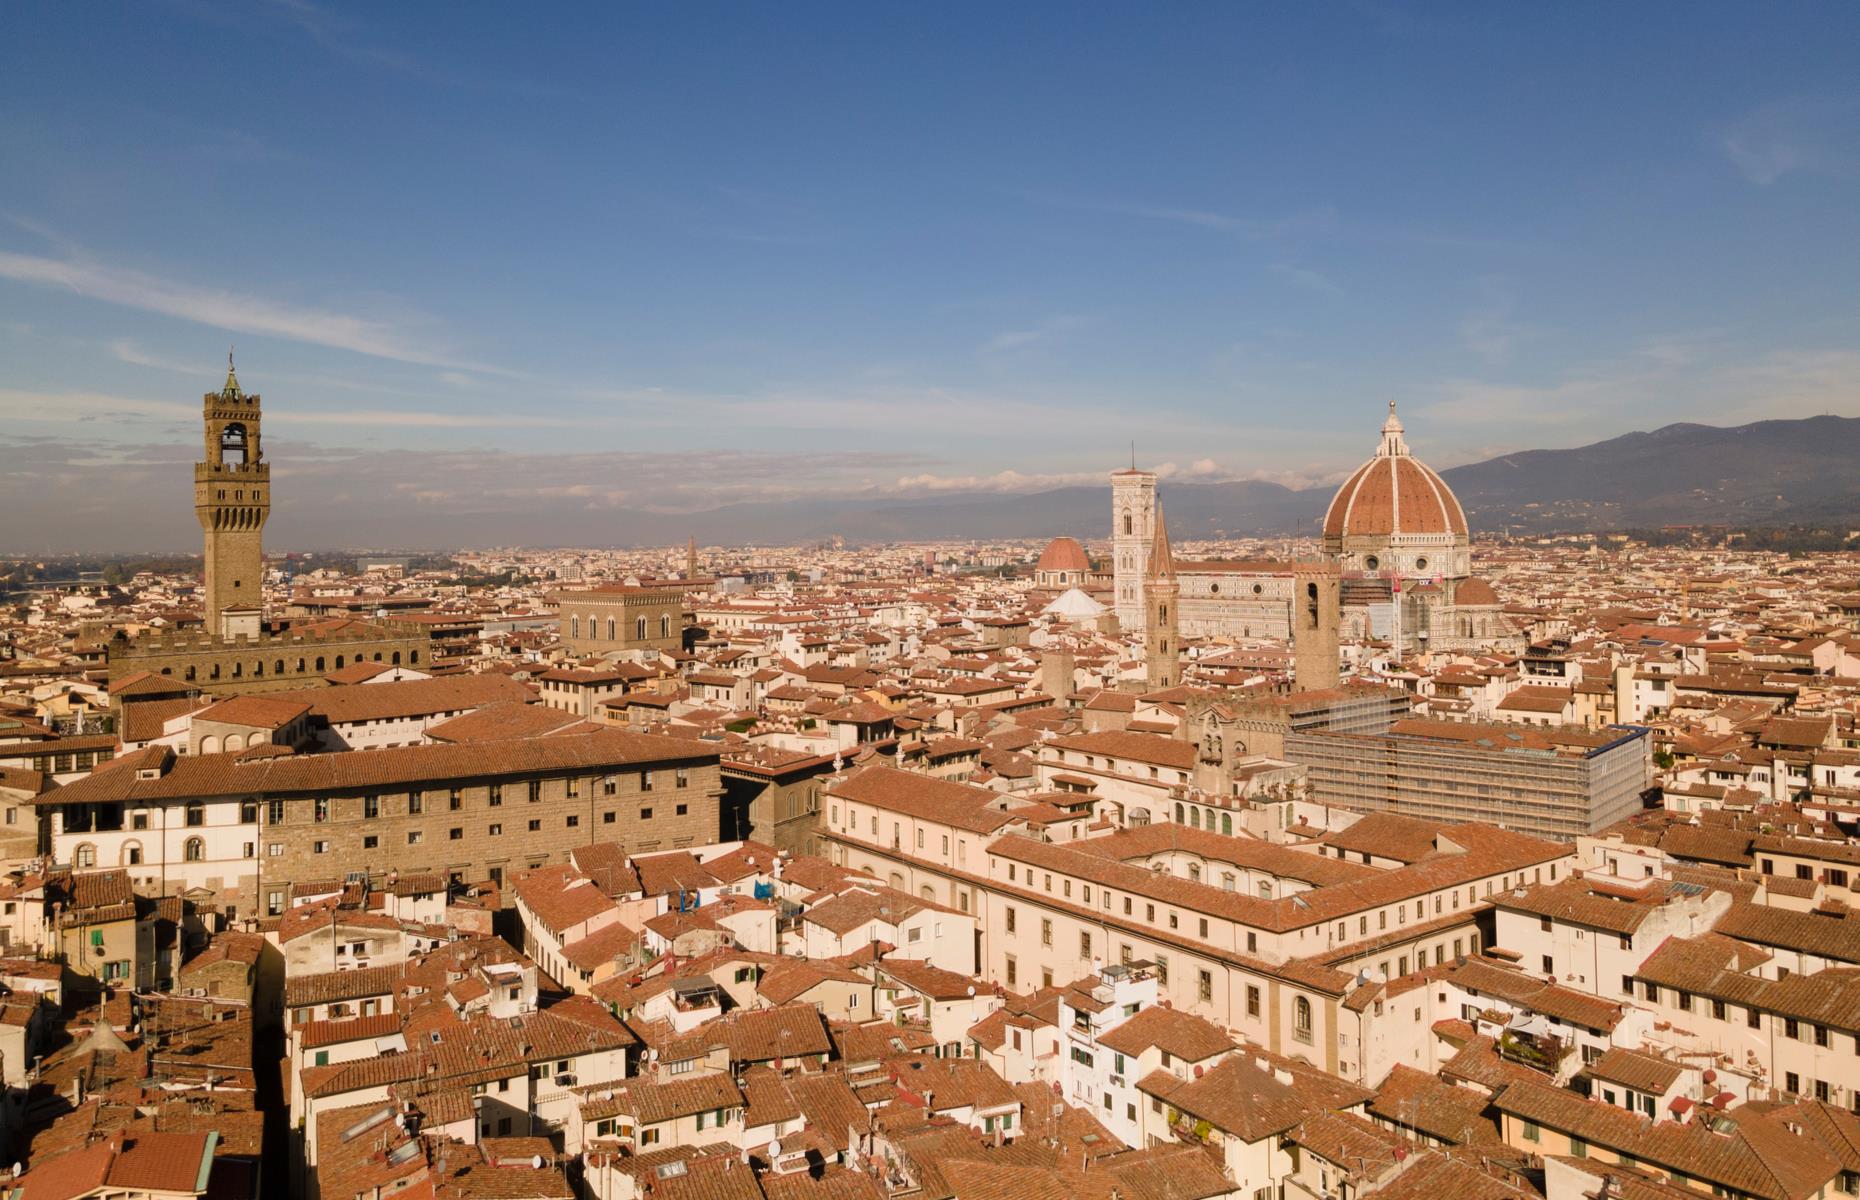 <p>Surrounded by Tuscany’s rolling hills, <a href="https://www.loveexploring.com/guides/83897/explore-florence-top-things-to-see-and-do-best-hotels-and-where-to-eat">Florence</a> is a hub for Renaissance architecture and art, set within its labyrinthine streets and dusty-hued buildings. While it may not be possible to wander these storied streets right now, we can gaze upon the likes of Brunelleschi's Dome, its iconic cathedral, the spires of the Piazza della Signoria and Palazzo Vecchio, and its patchwork of pretty terracotta rooftops. </p>